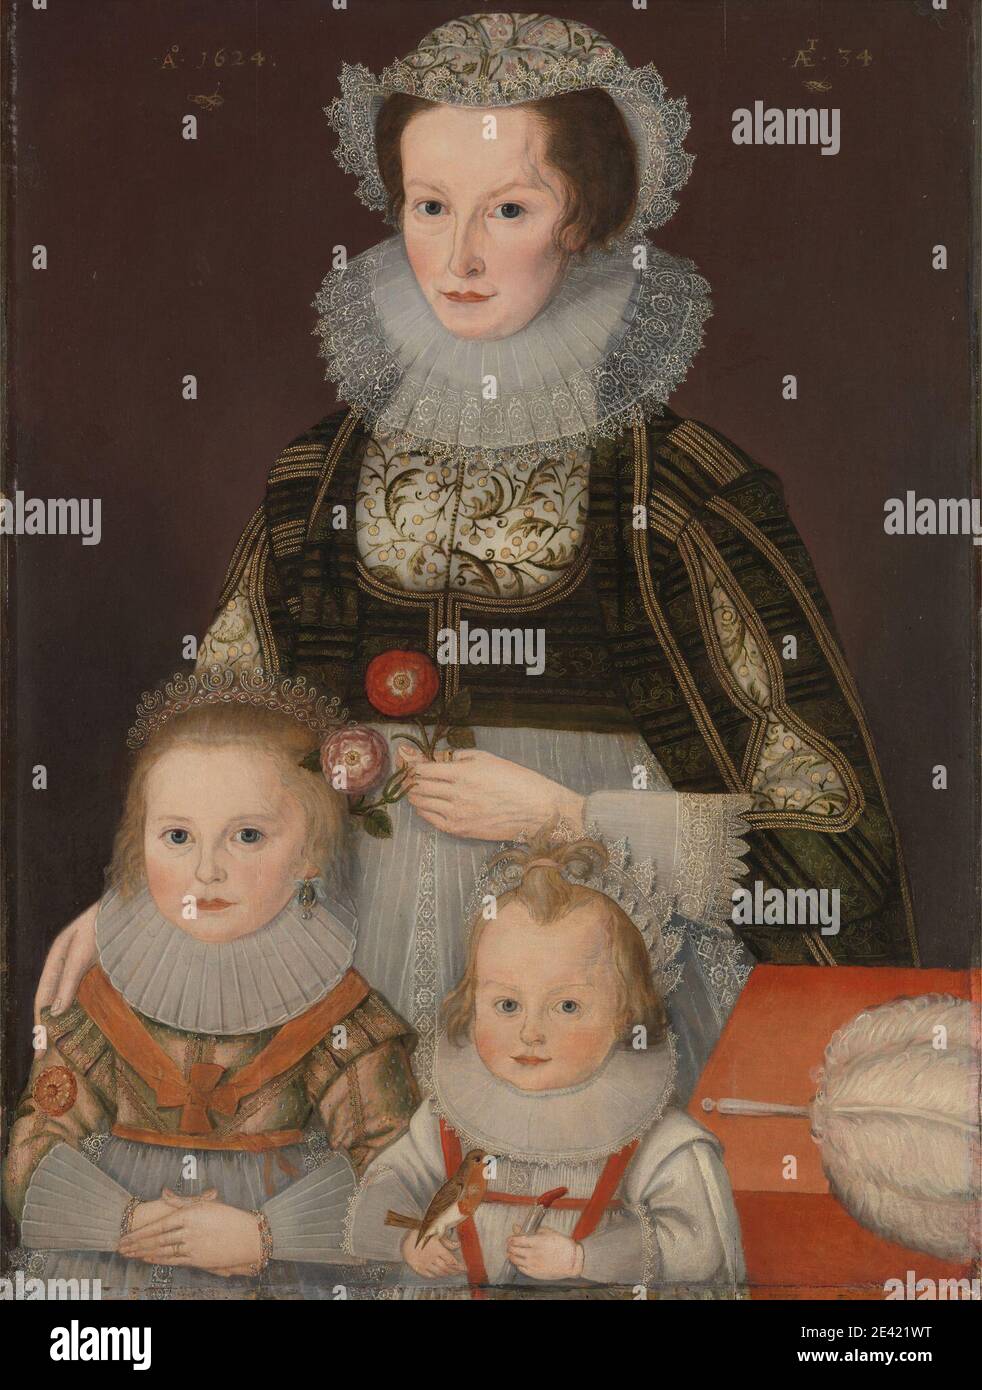 unknown artist, seventeenth century, A Lady and Her Two Children, 1624. Oil on panel.   background , bird , black , children , collars , coral , costume , crown , earrings , European Robin , family , feather , flowers (plants) , gold , headdress , Jacobean , lace , orange , pink (color) , portrait , red , toys (recreational artifacts) , Tudor , white (color) , woman Stock Photo